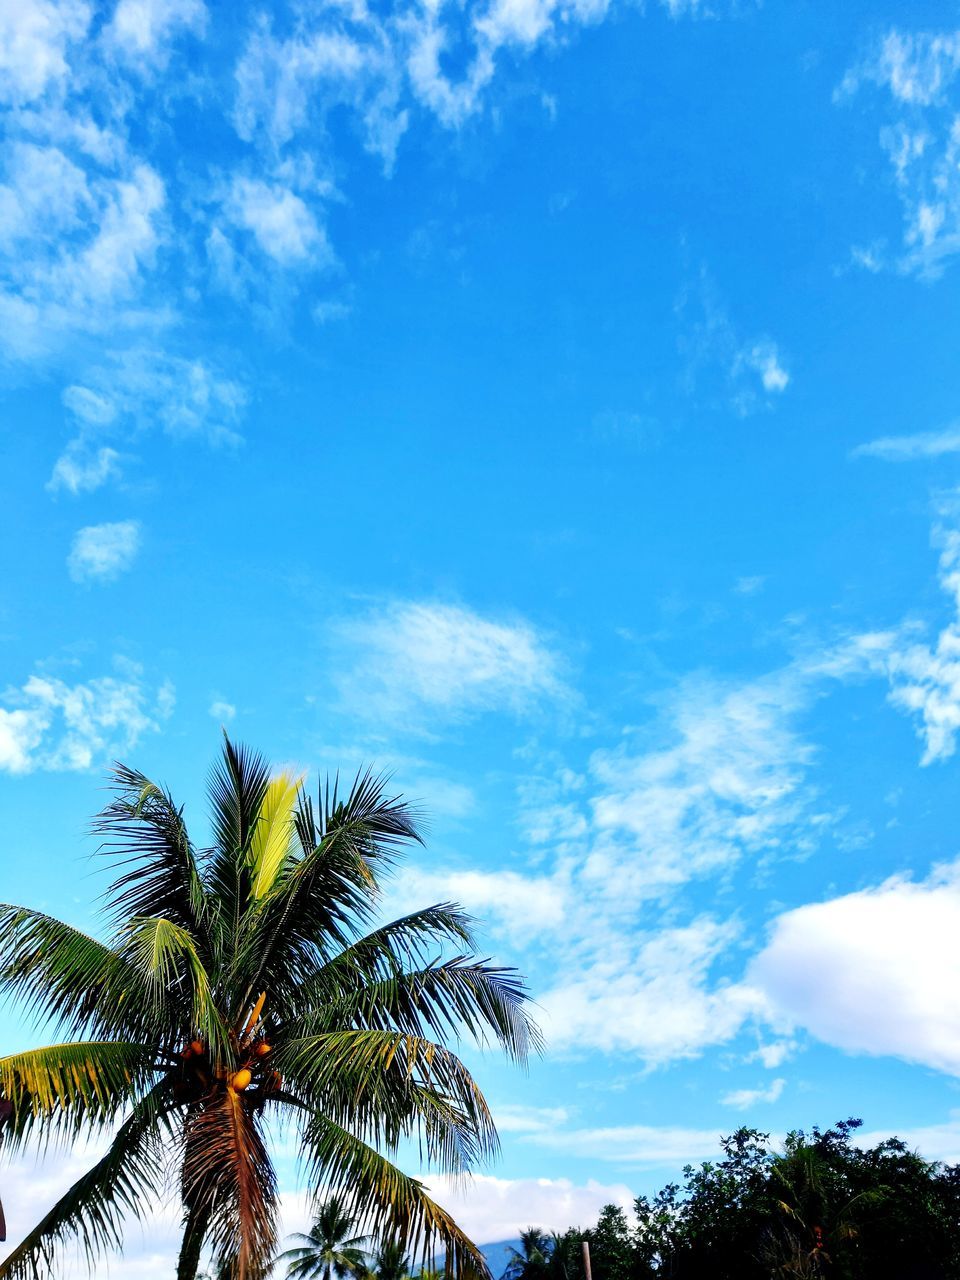 tree, palm tree, tropical climate, sky, plant, cloud, nature, beauty in nature, coconut palm tree, blue, tropical tree, scenics - nature, no people, tranquility, travel destinations, leaf, outdoors, sunlight, land, low angle view, tropics, growth, environment, tranquil scene, day, idyllic, travel, vacation, trip, holiday, palm leaf, sea, horizon, water, tourism, summer, ocean, island, copy space, cloudscape